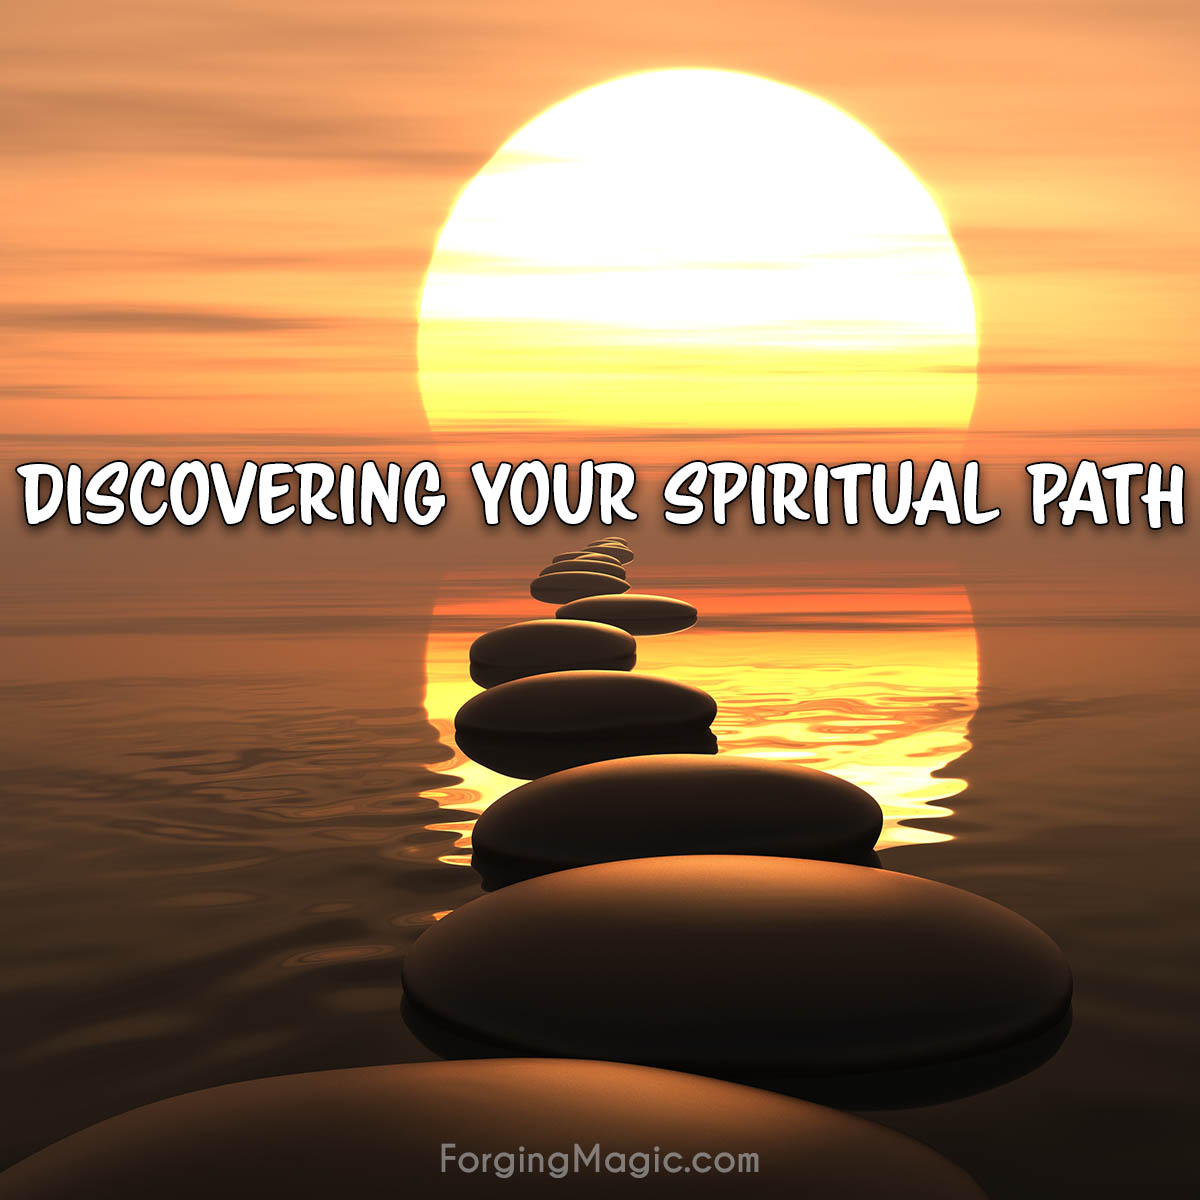 Discovering your spiritual path